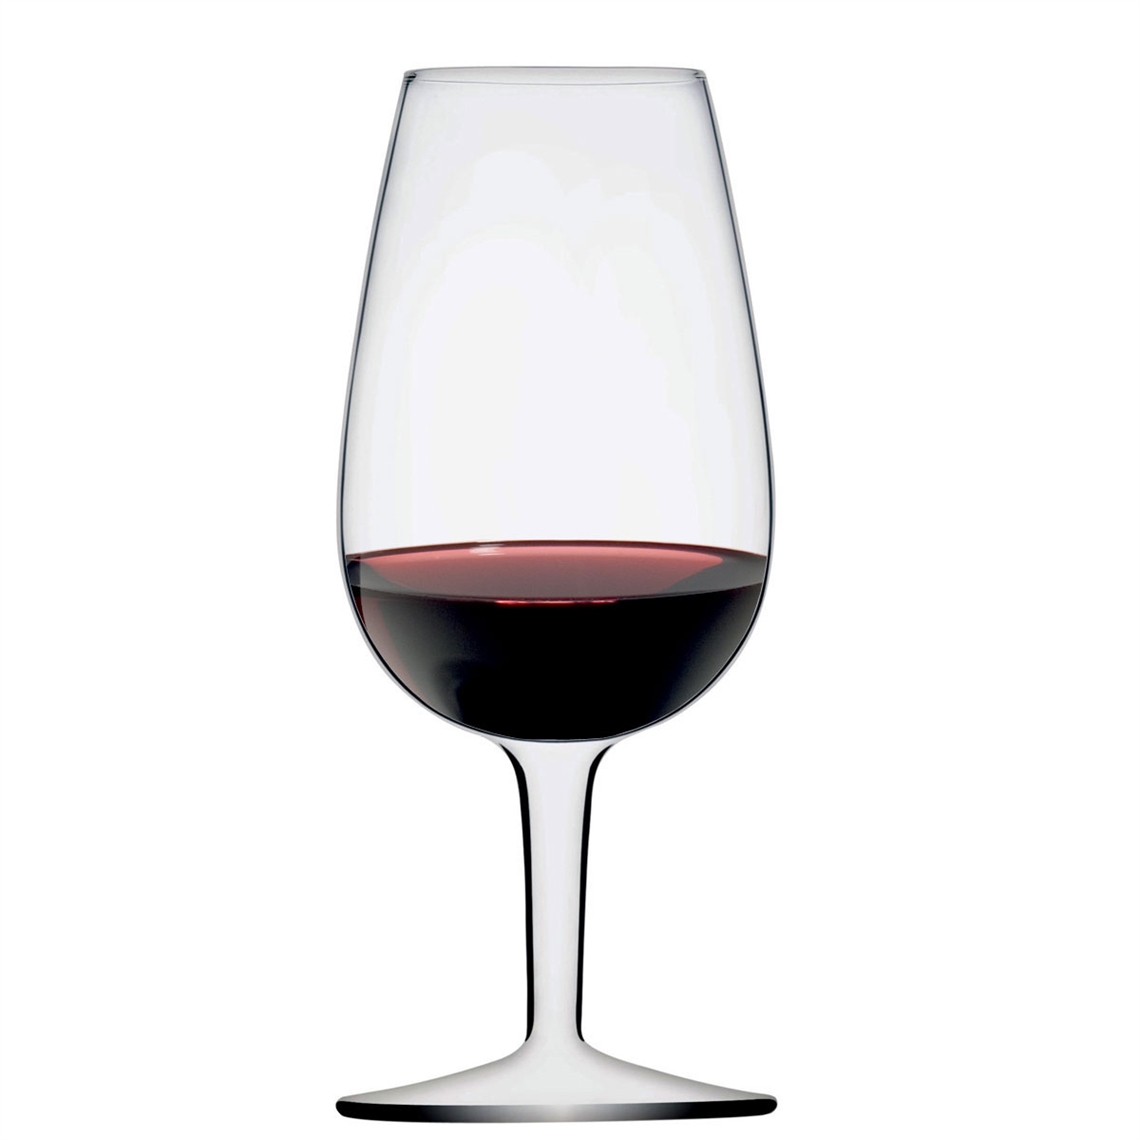 View more which riedel wine glass to choose from our Wine Tasting Glasses range